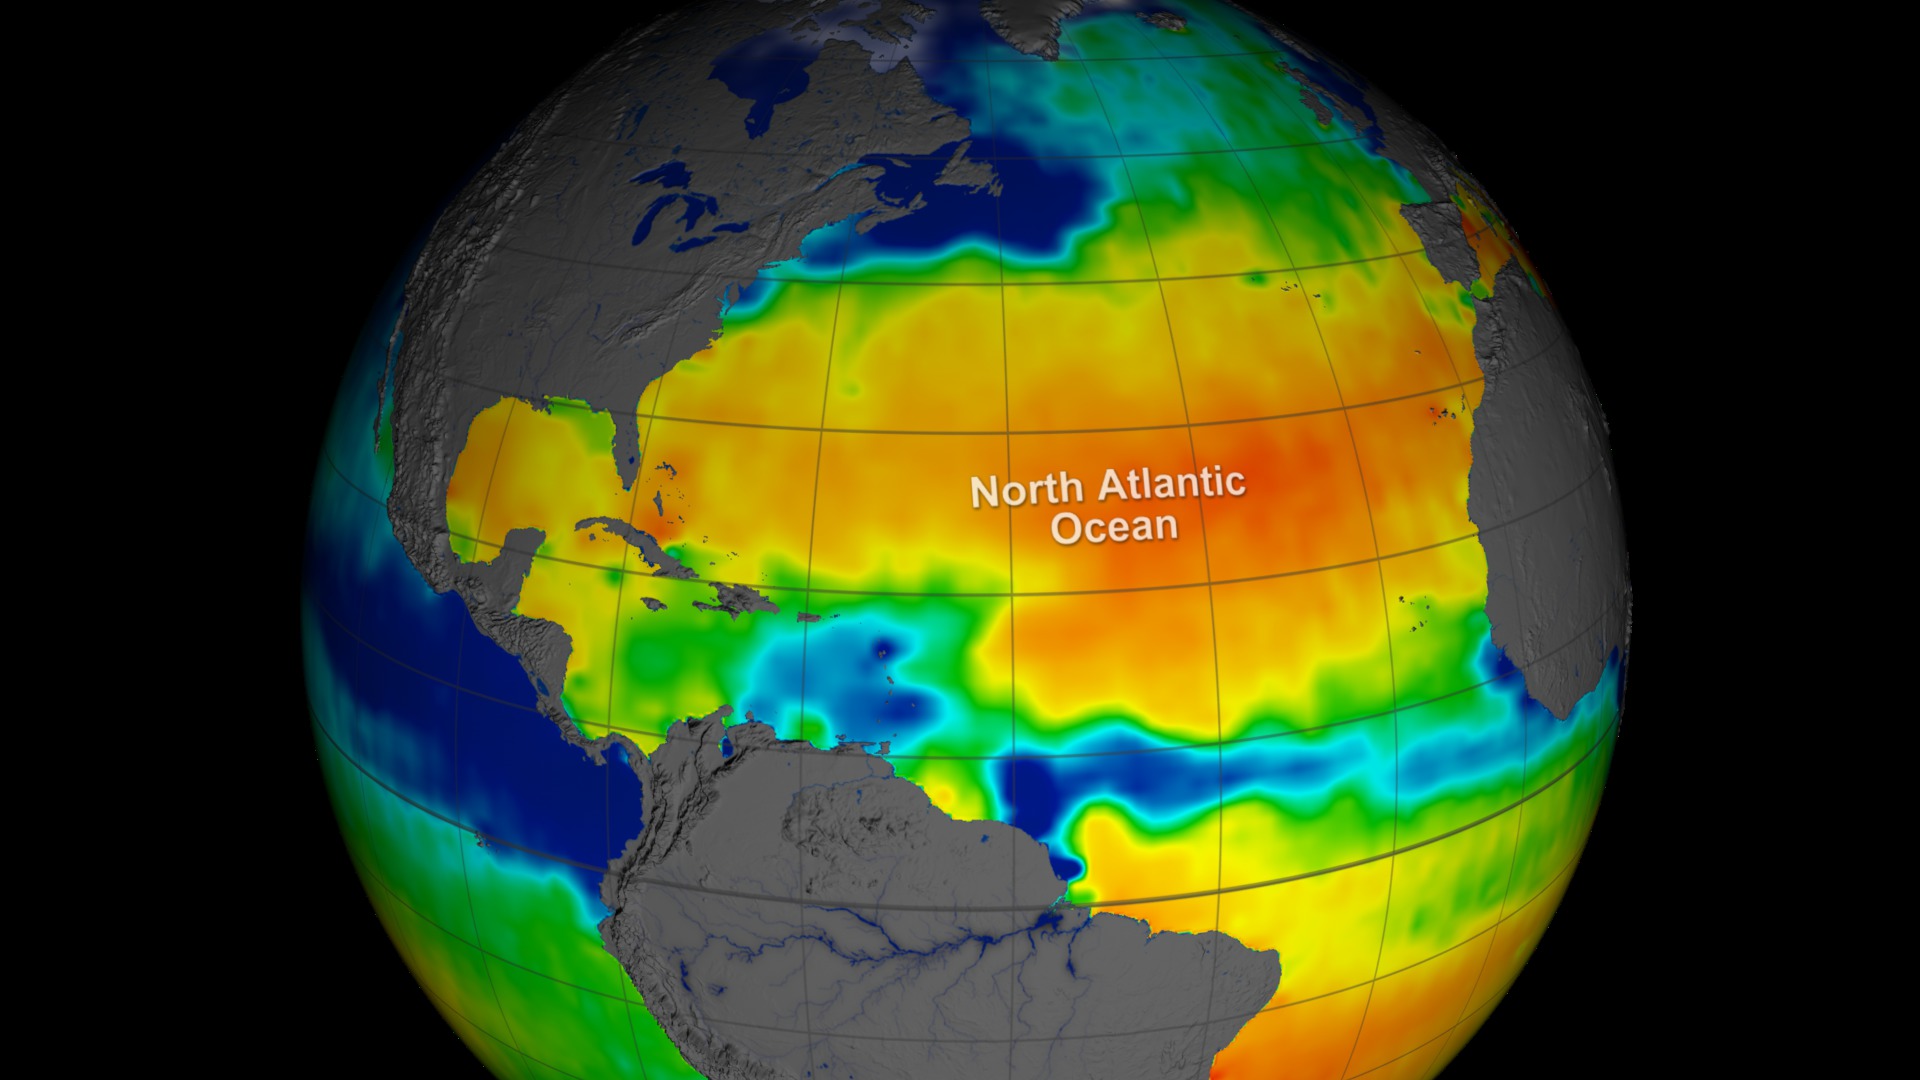 A tour of Aquarius sea surface salinity data highlighting interesting features including: the North Atlantic, Eastern Pacific, Amazon outflow, Labrador current, and Indian Ocean.